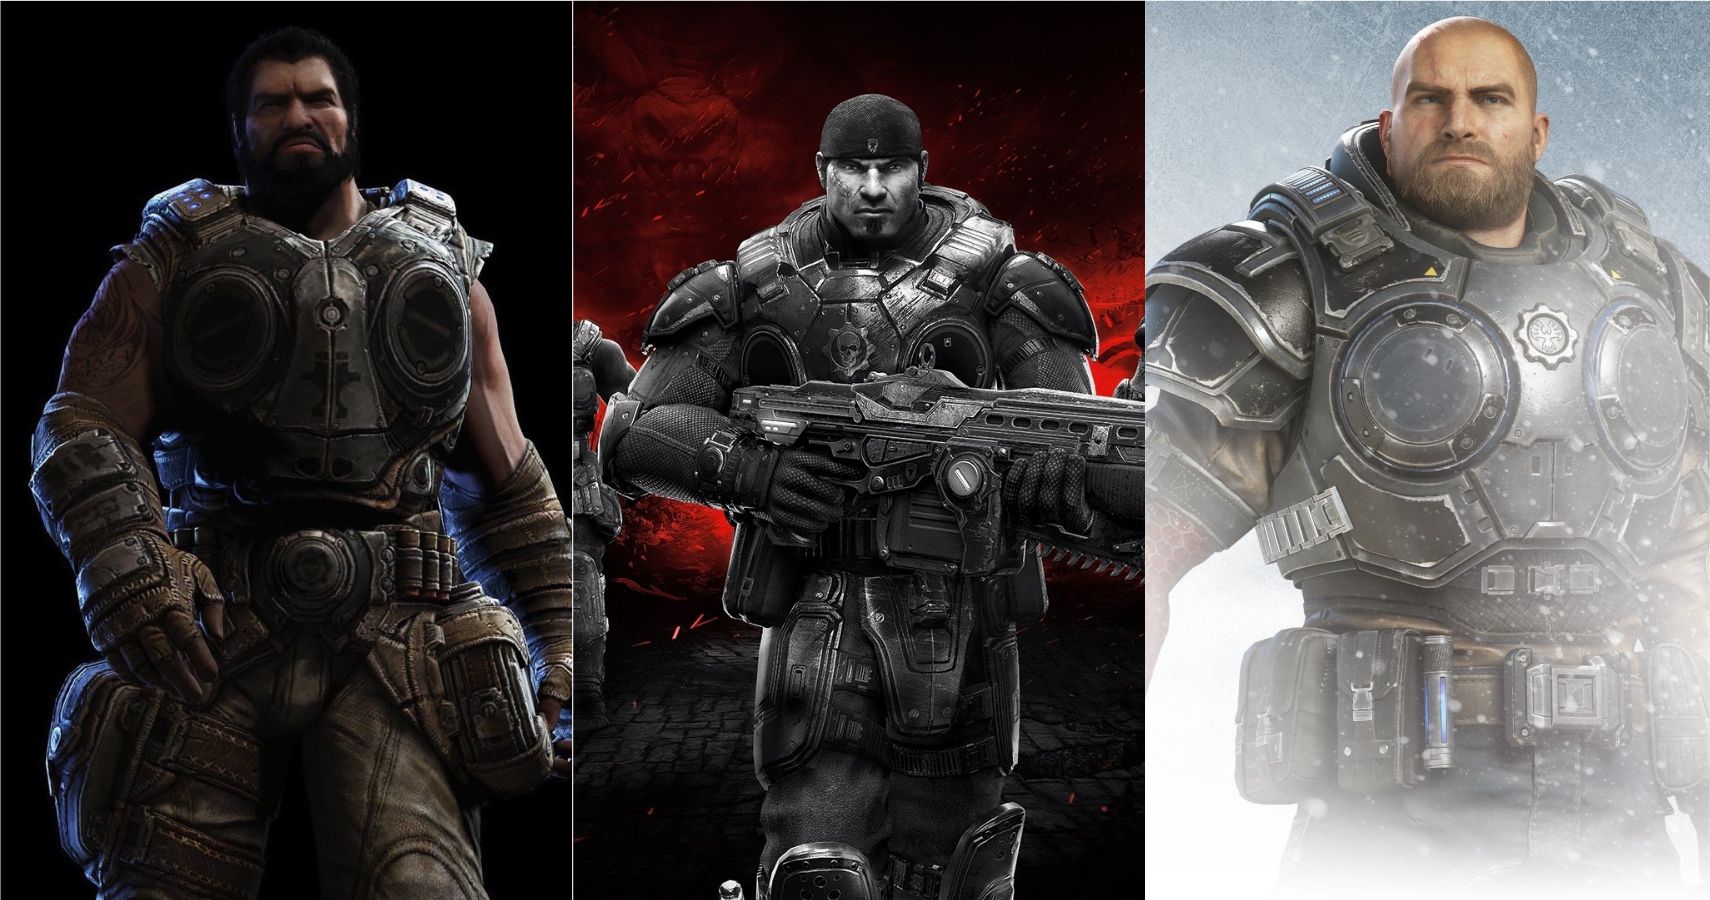 Gears: Every Main Character's Age, Height, And Birthday